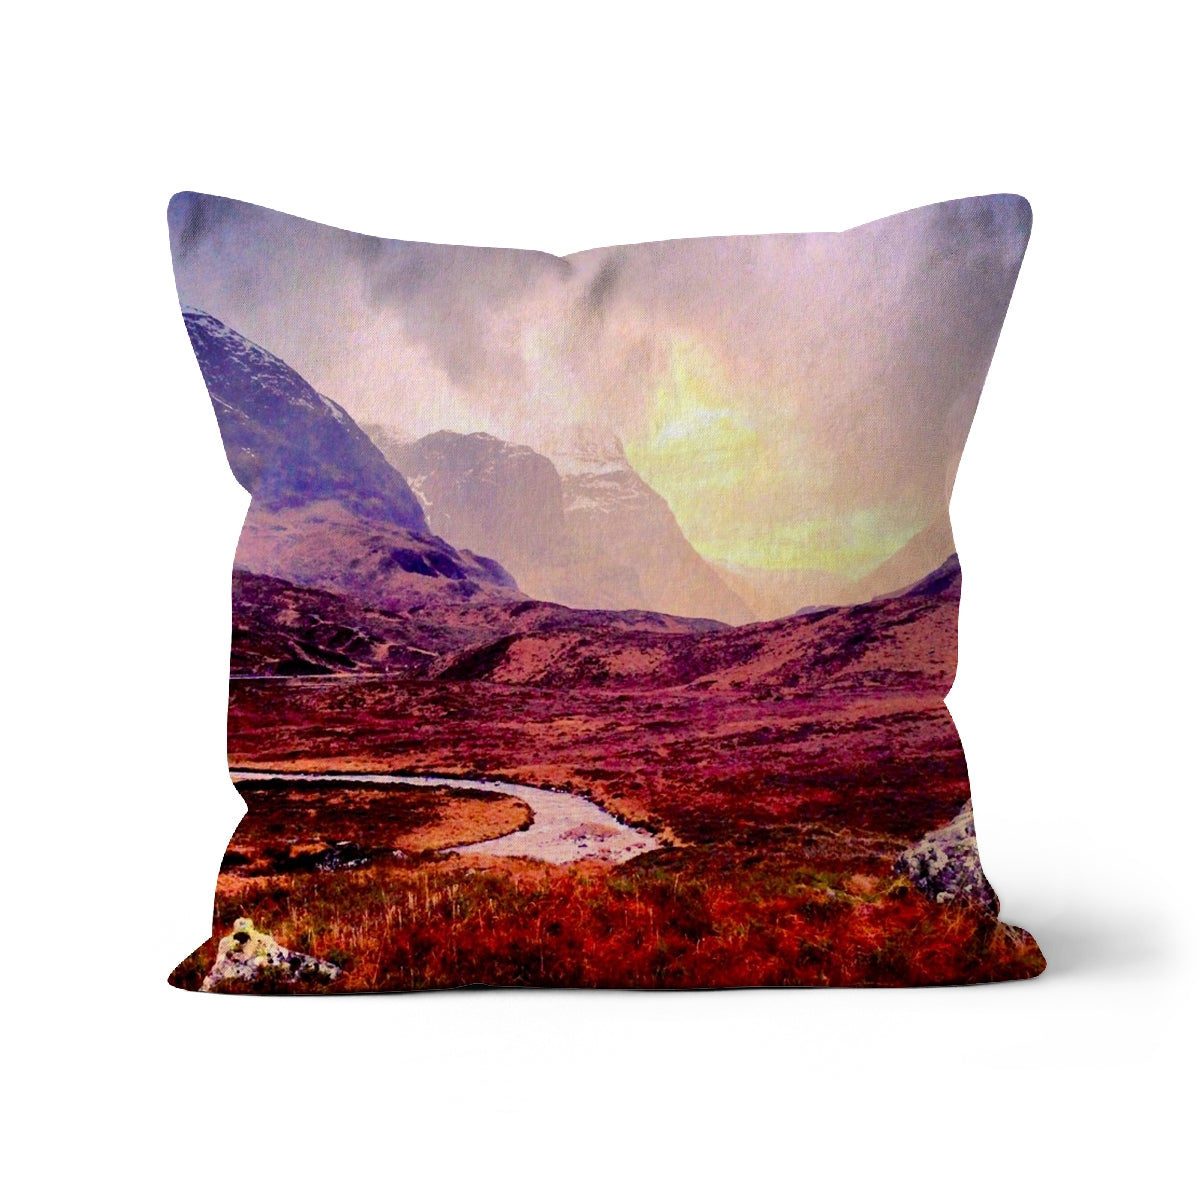 A Brooding Glencoe Art Gifts Cushion-Cushions-Glencoe Art Gallery-Faux Suede-16"x16"-Paintings, Prints, Homeware, Art Gifts From Scotland By Scottish Artist Kevin Hunter